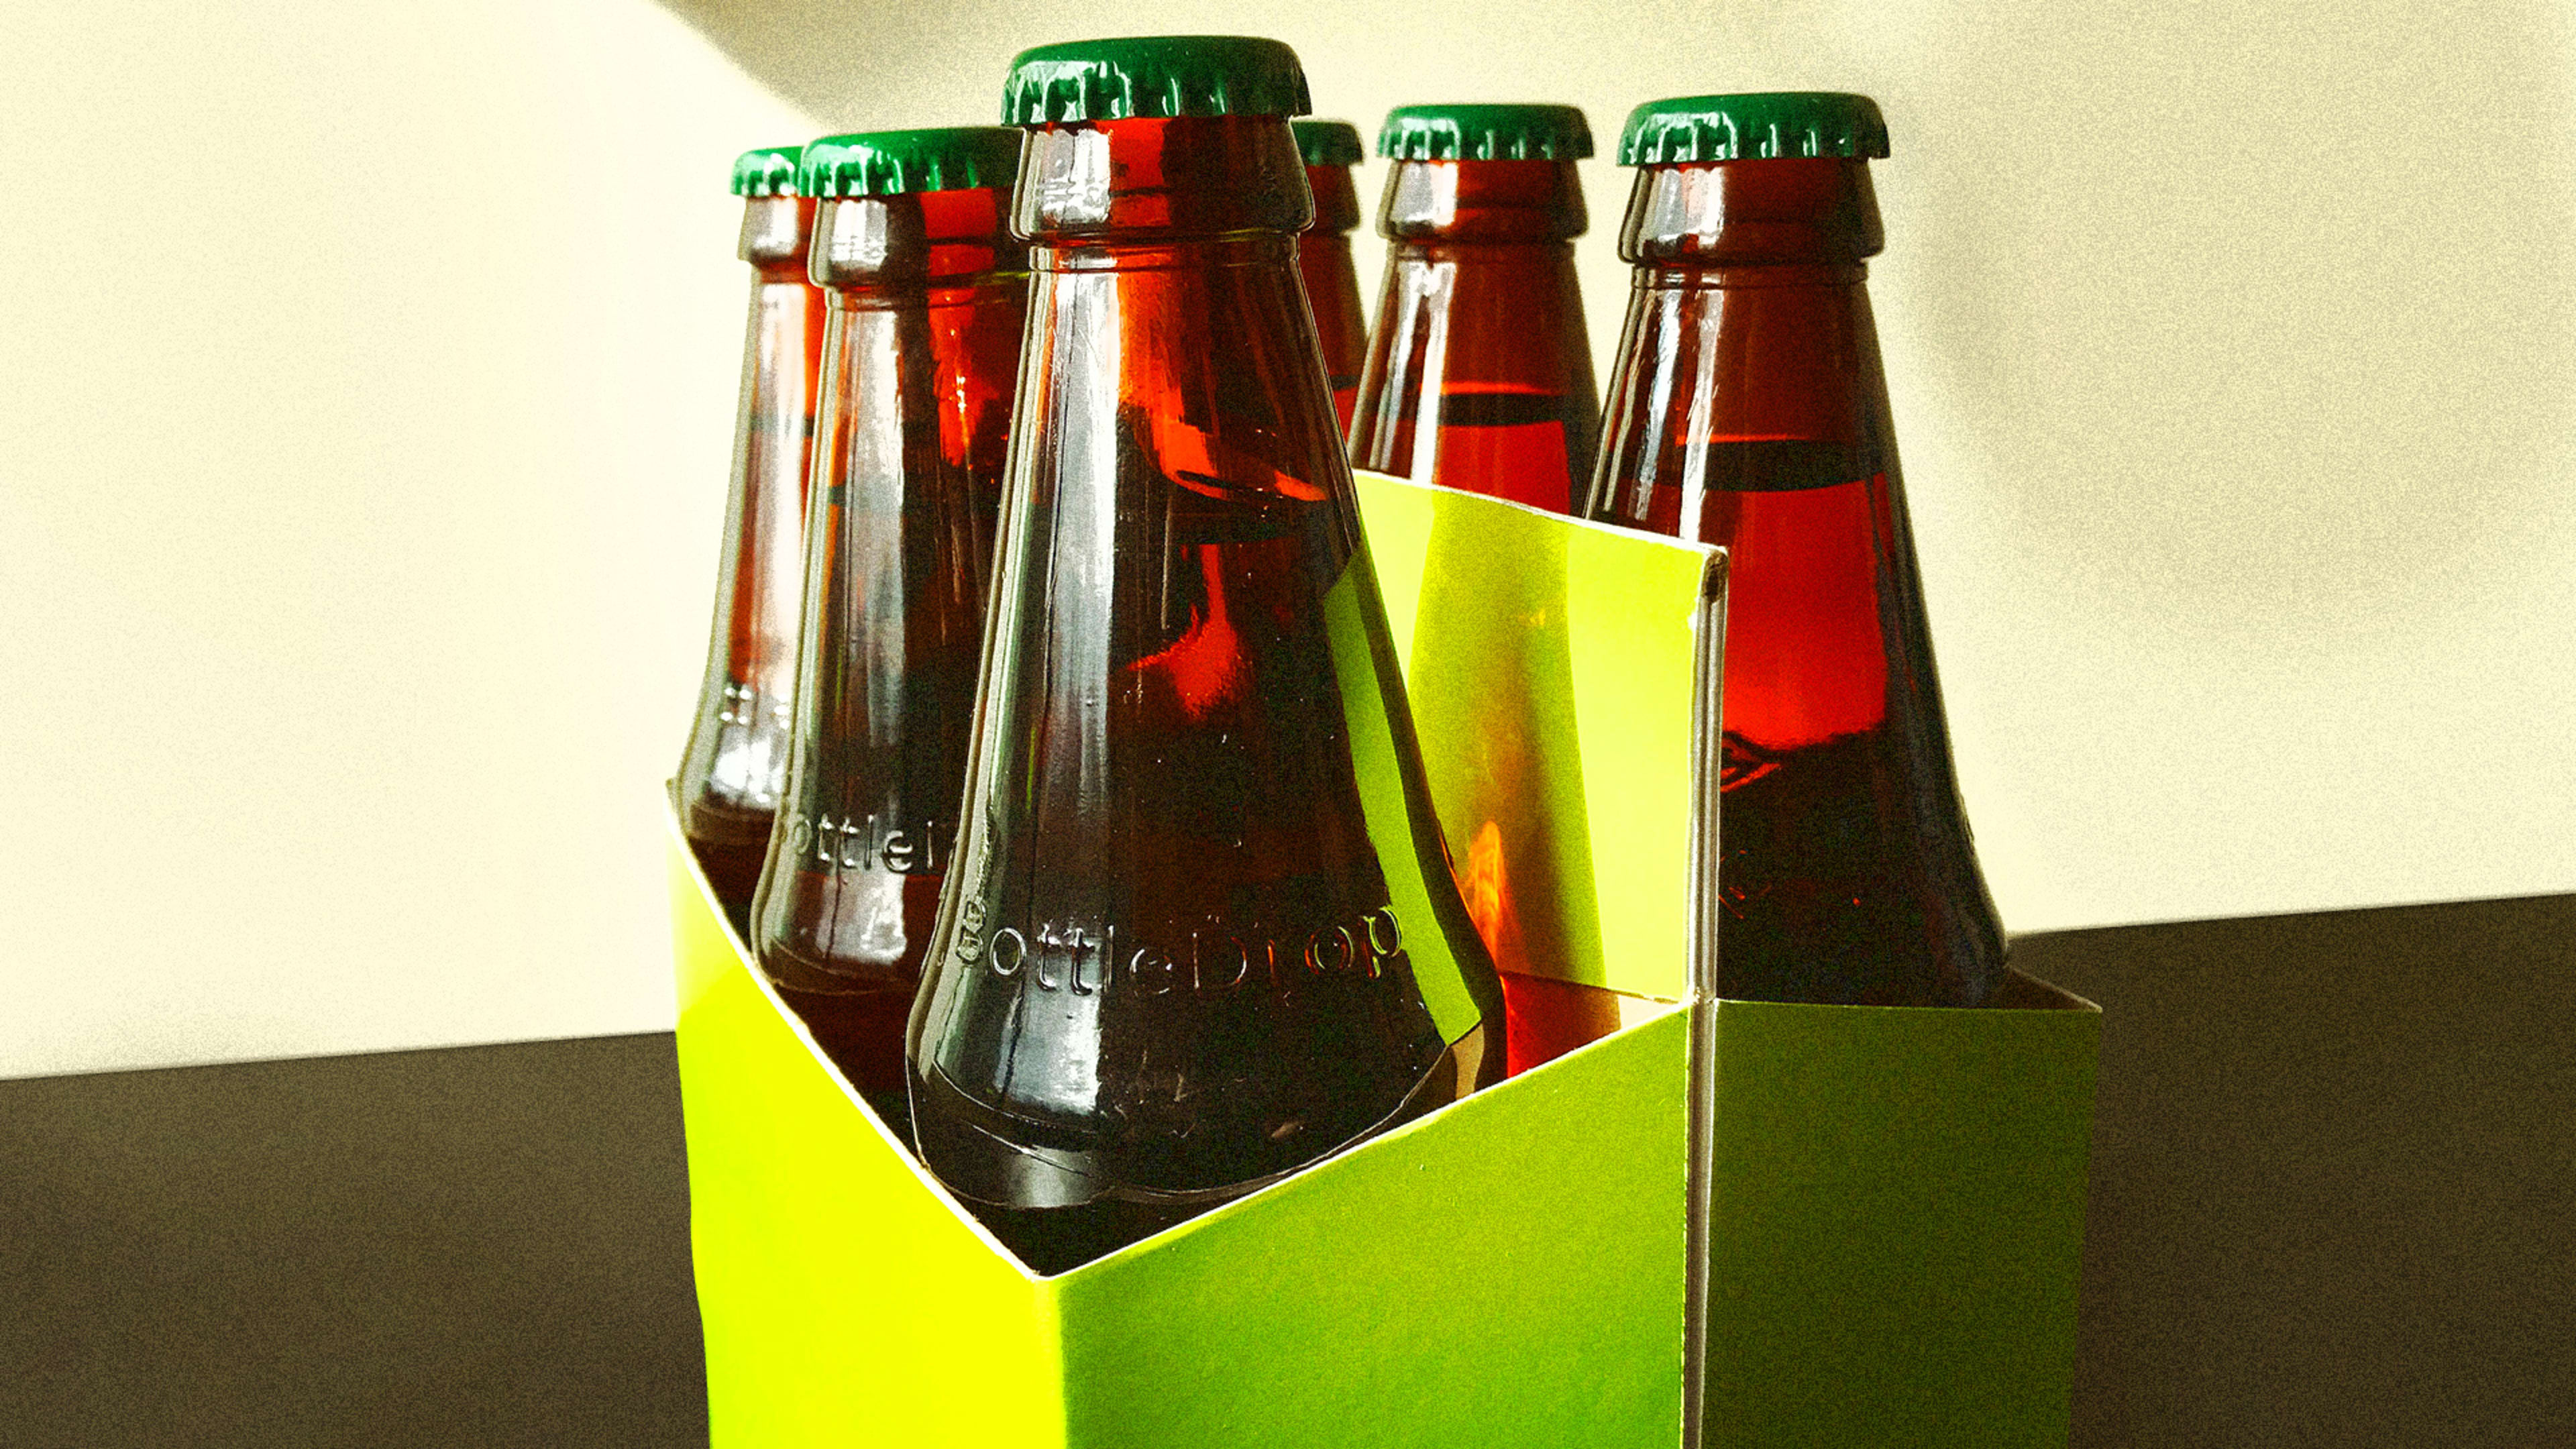 This reusable beer bottle could change the way America drinks